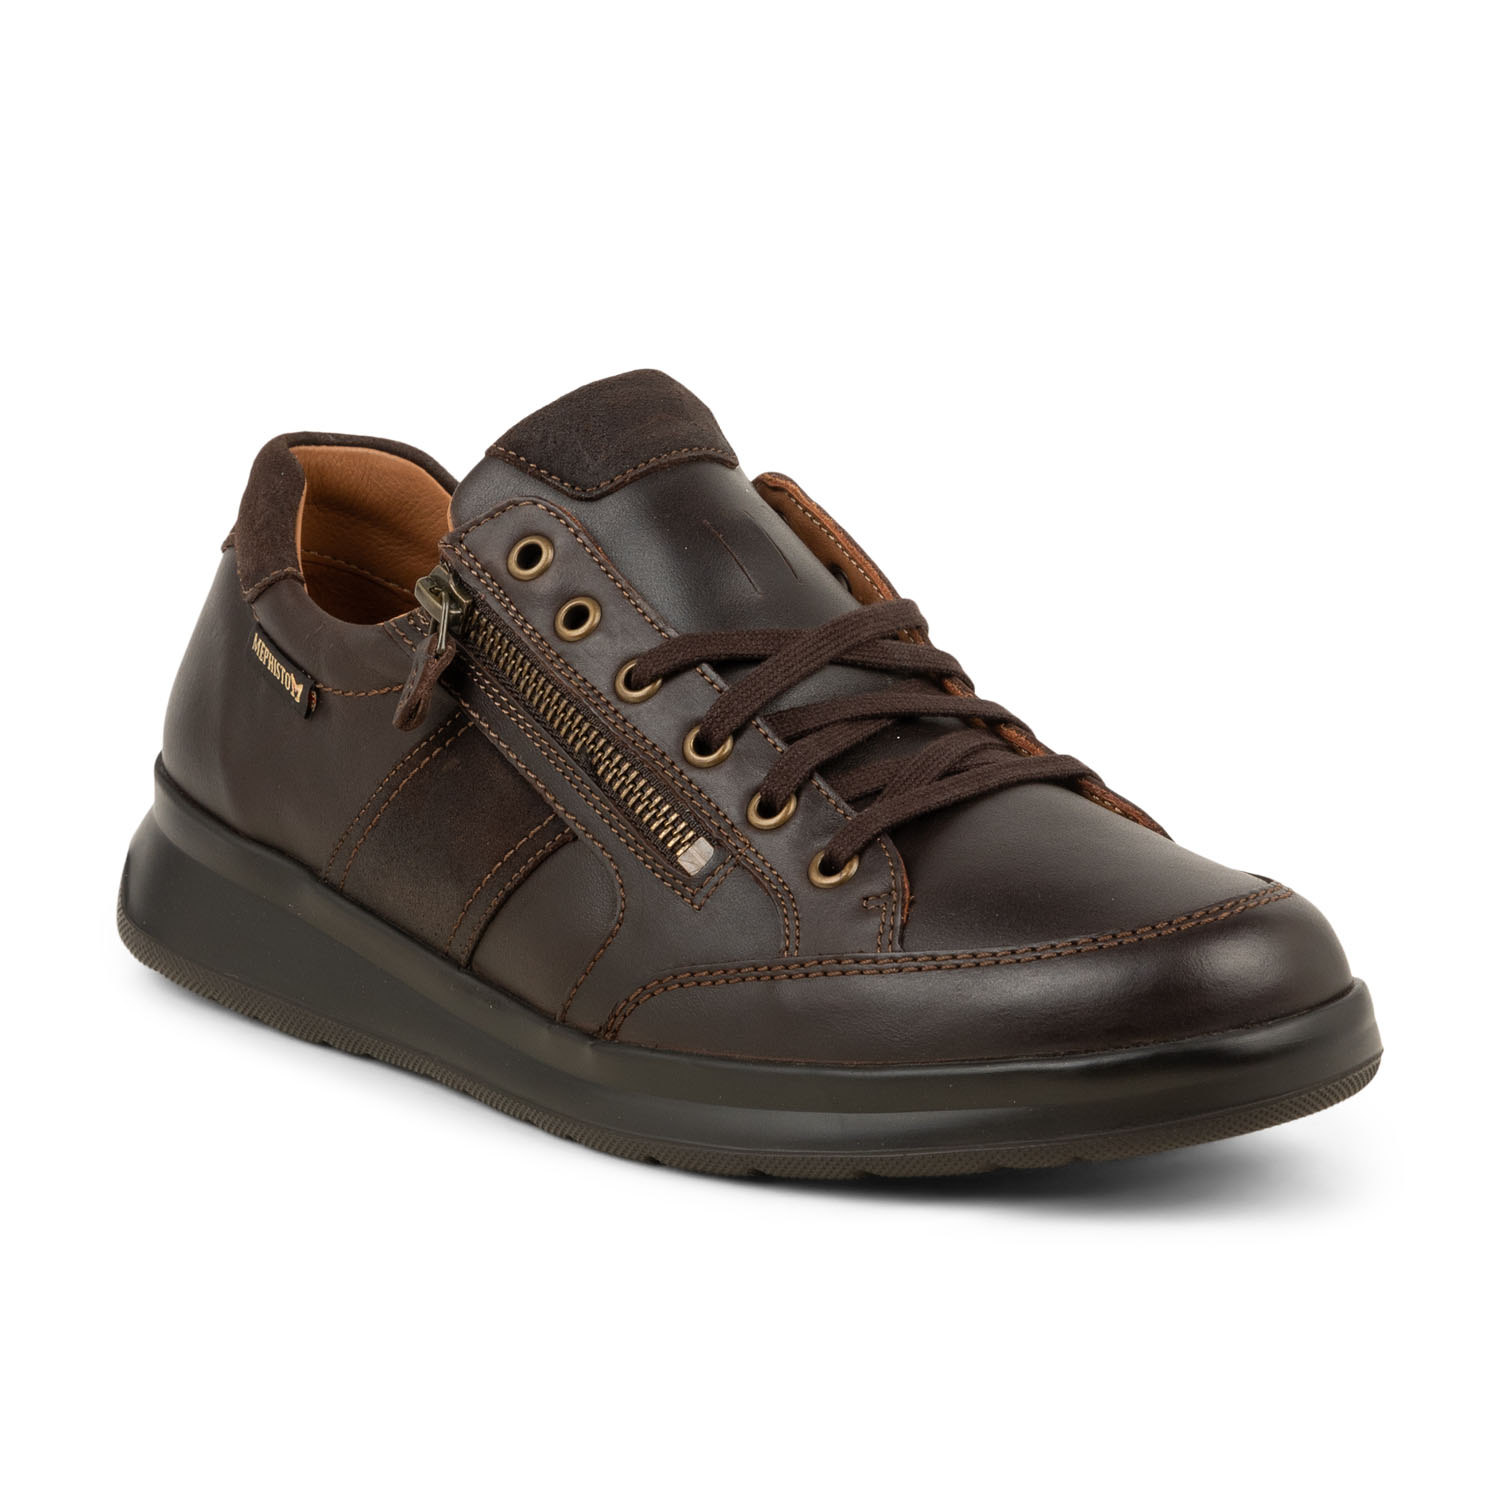 02 - LISANDRO WIN - MEPHISTO - Chaussures à lacets - Cuir